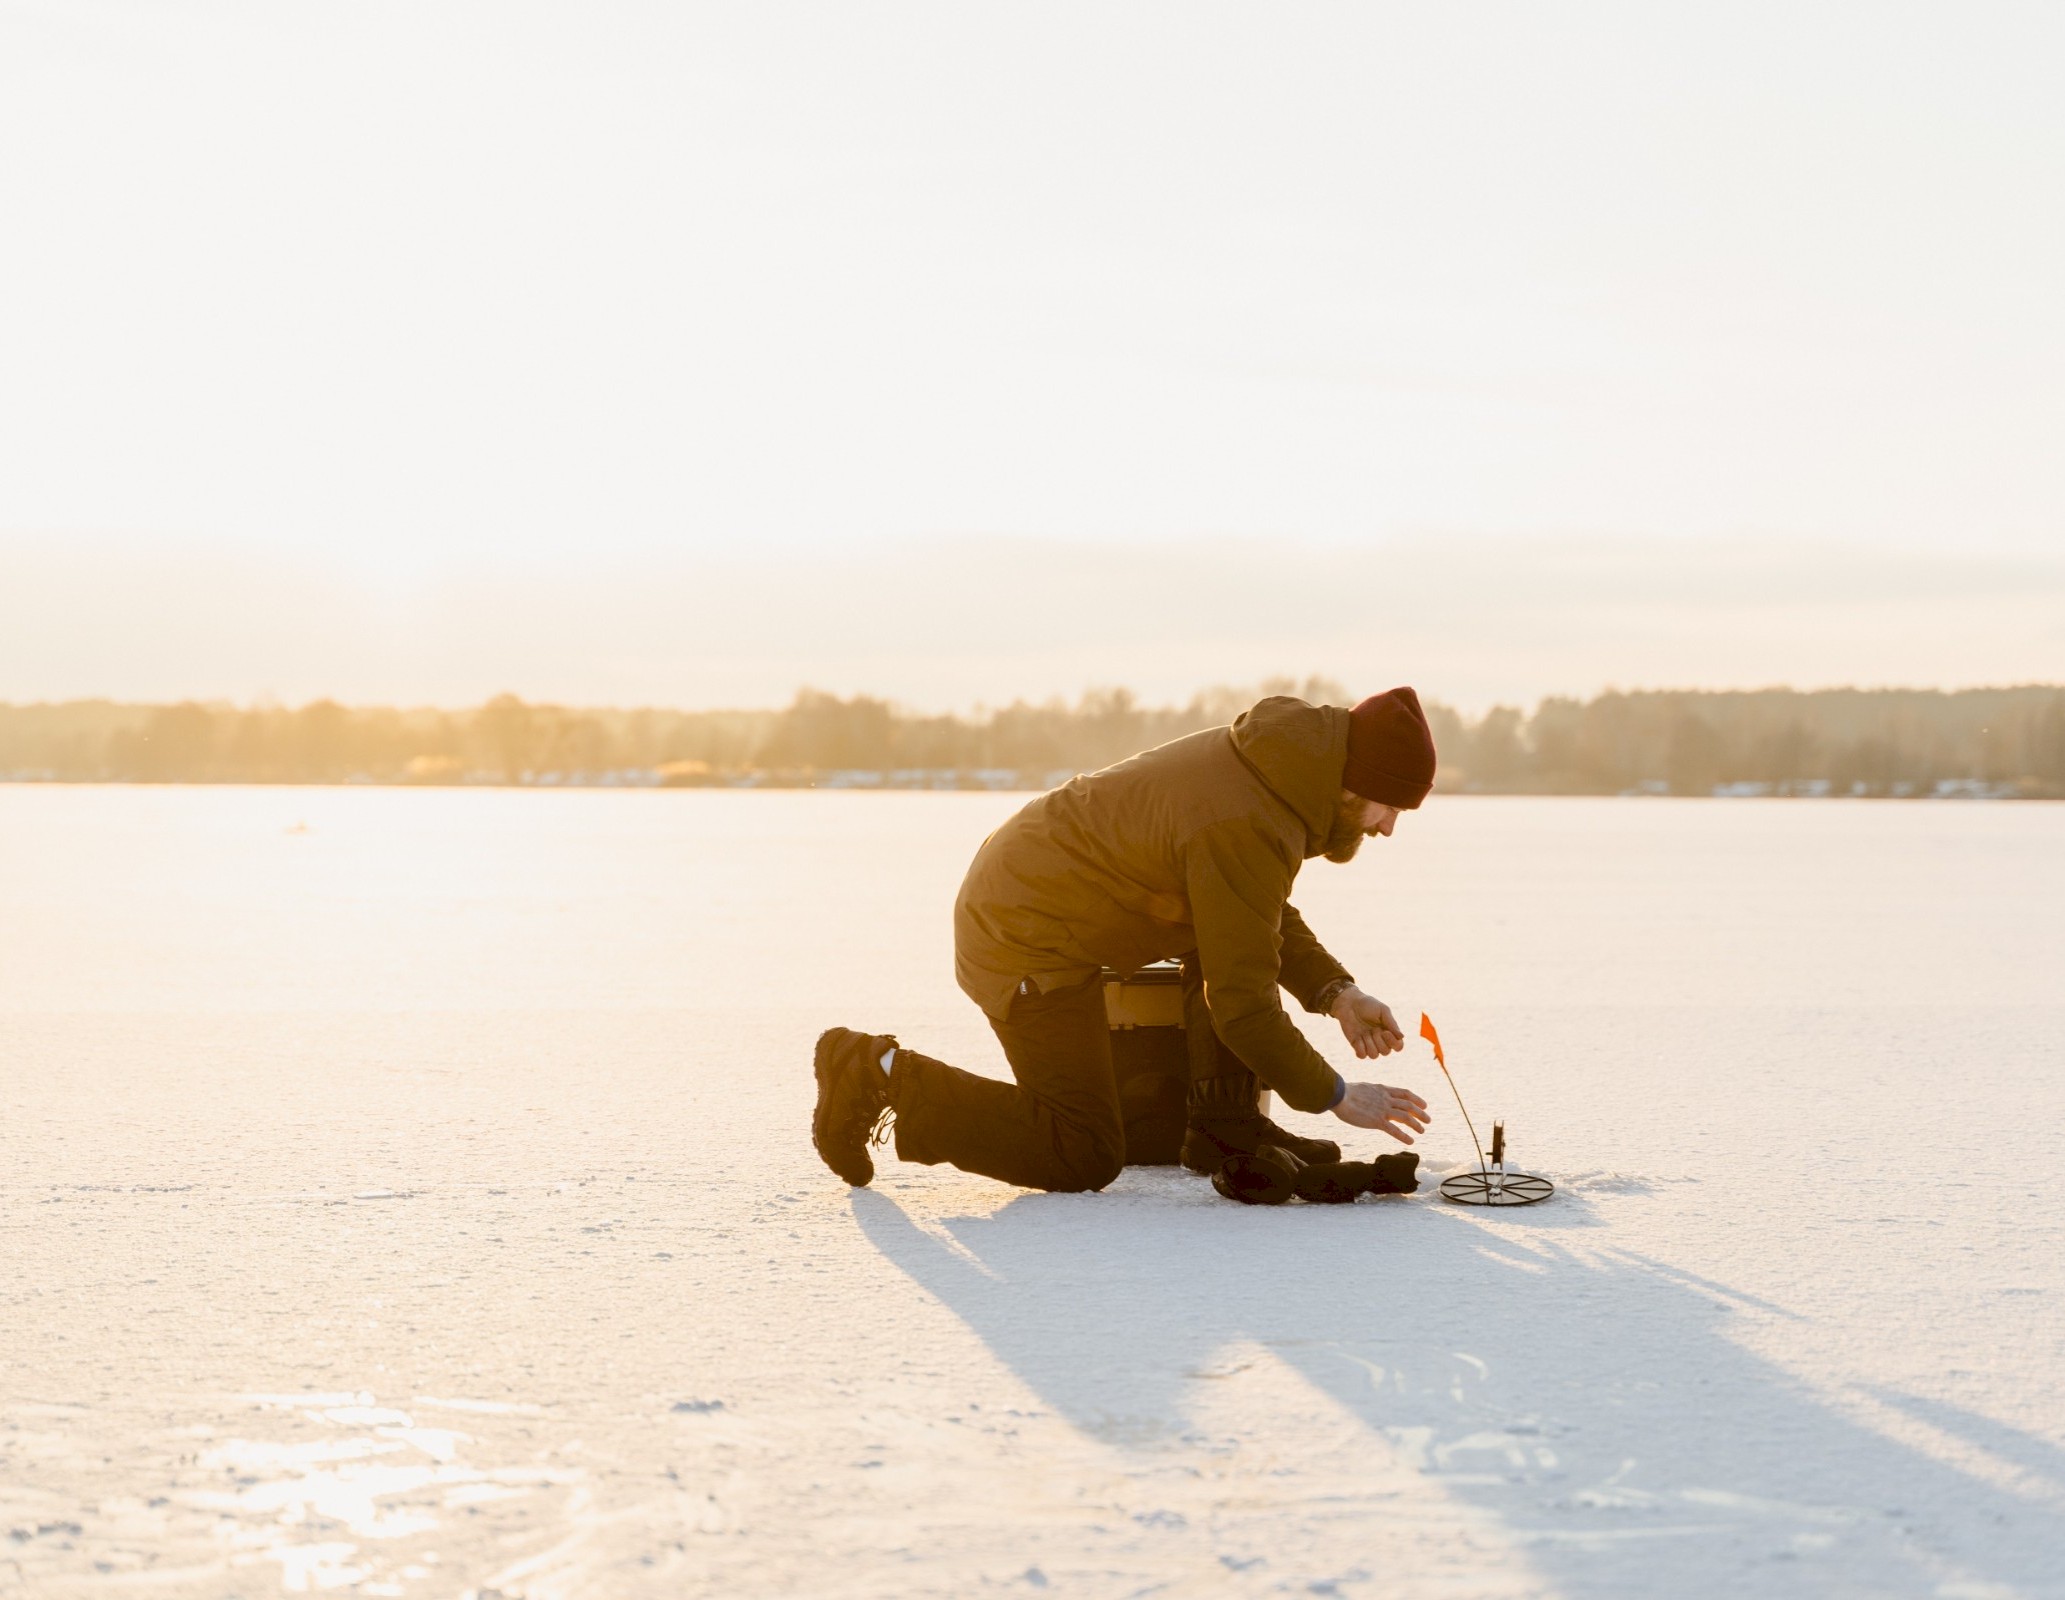 A man ice fishing on the frozen lake